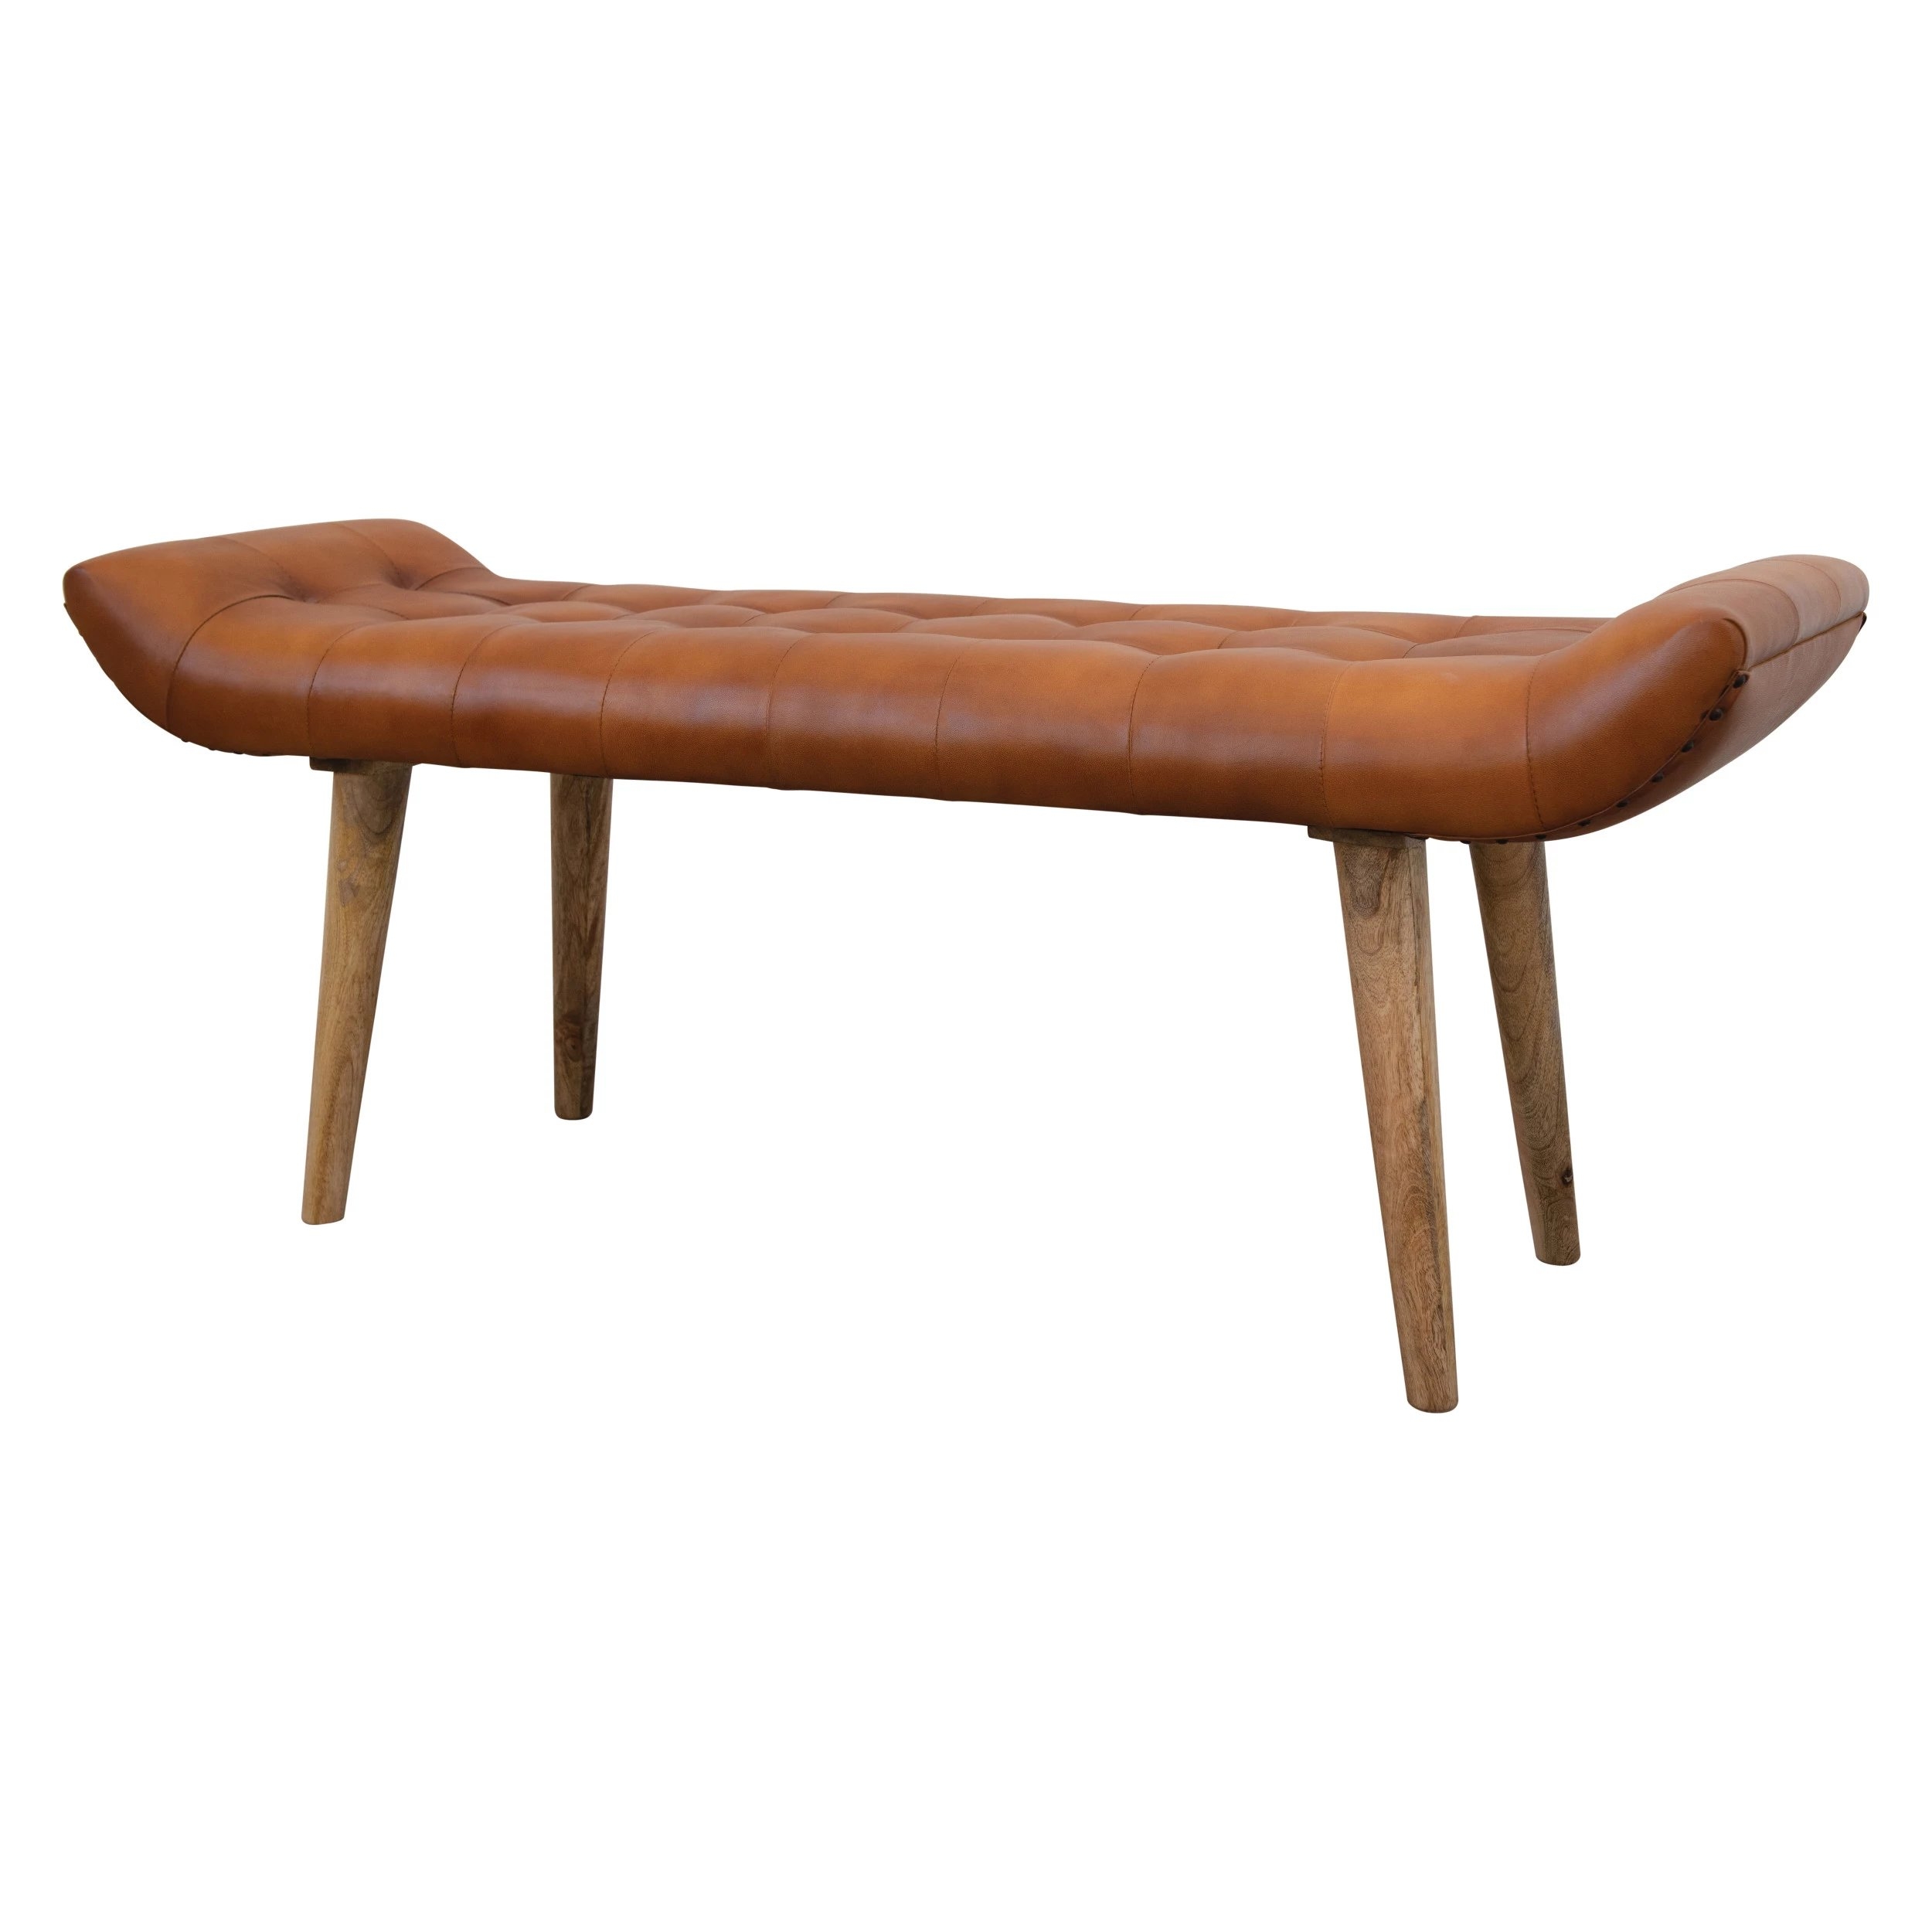 Leather Tufted Bench with Mango Wood Legs - Image 4